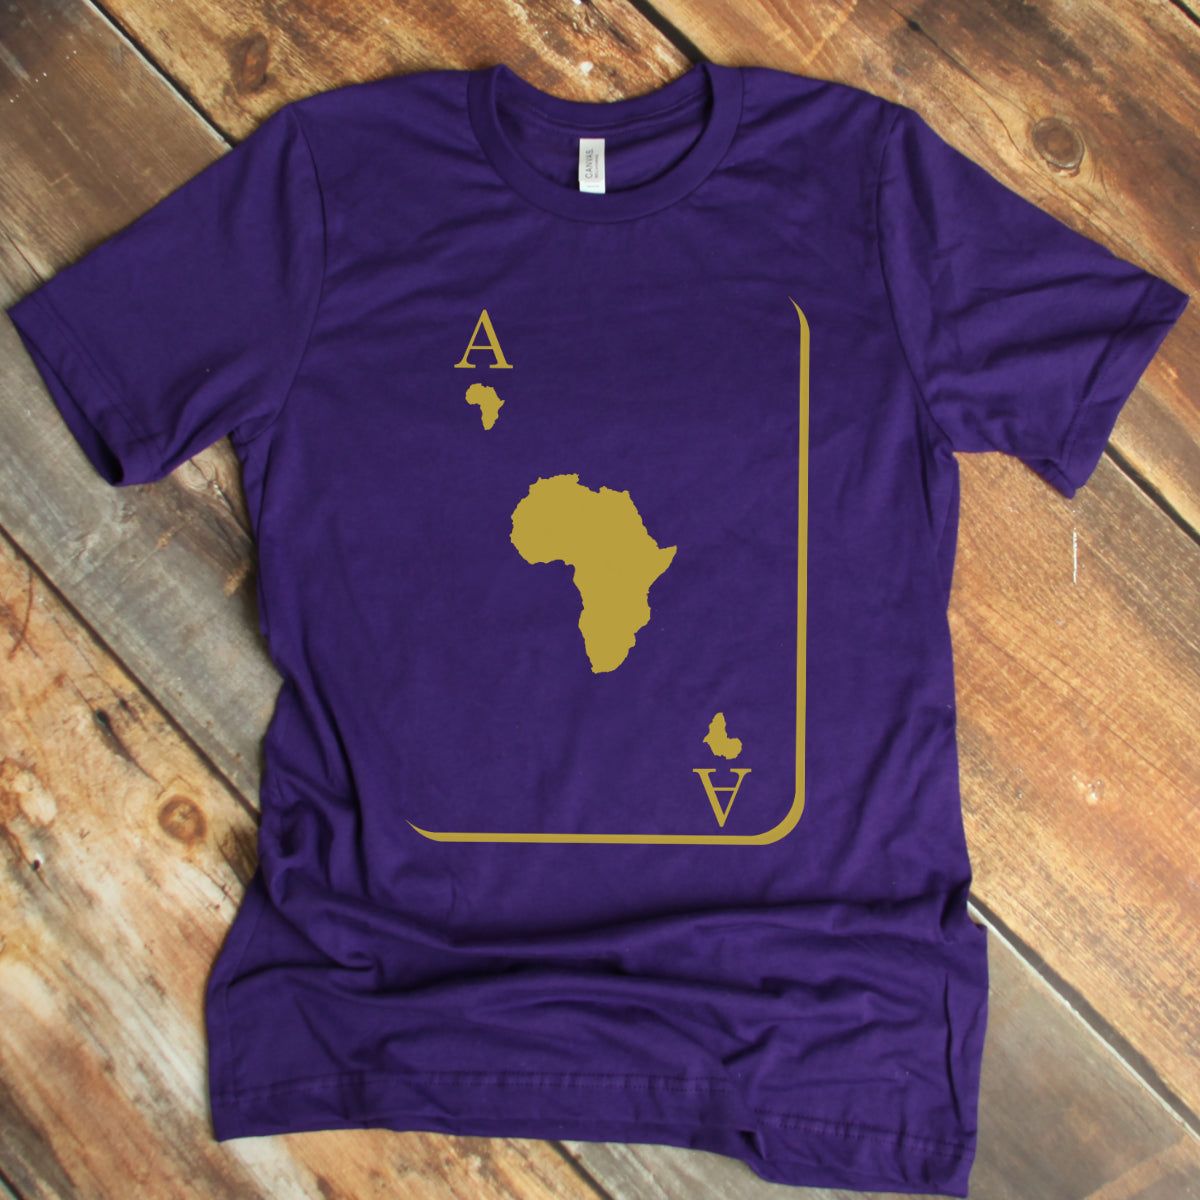 The Ace Omega Purple and Old Gold Tshirt